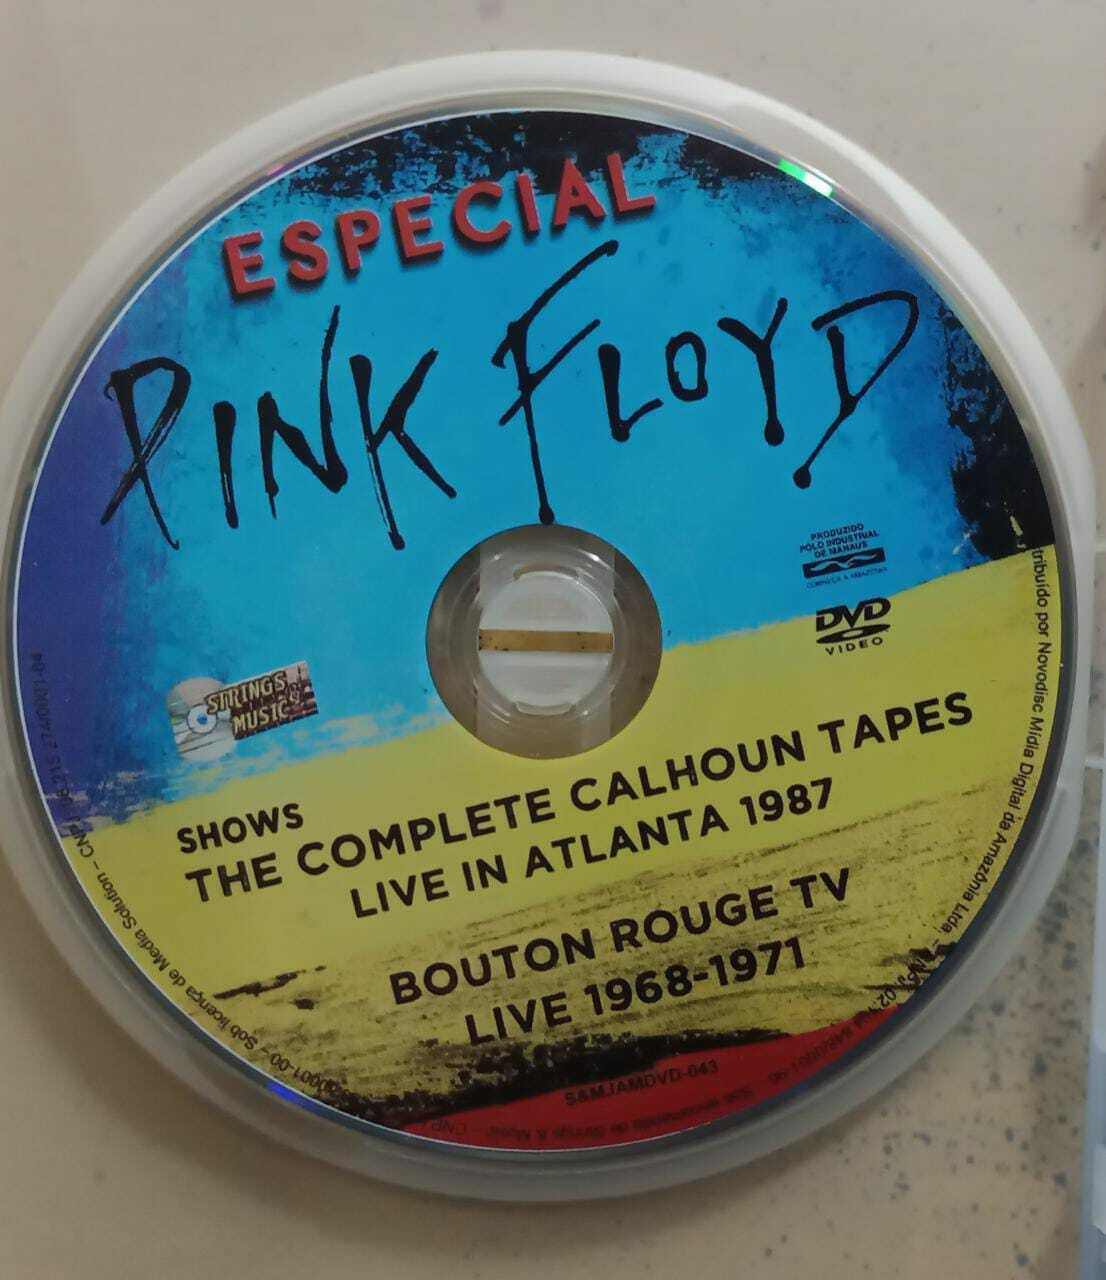 DVD - Pink Floyd - The Complete Calhoun Tapes Live In Atlanta 1987 + Bouton Rouge TV Live 1968-1971